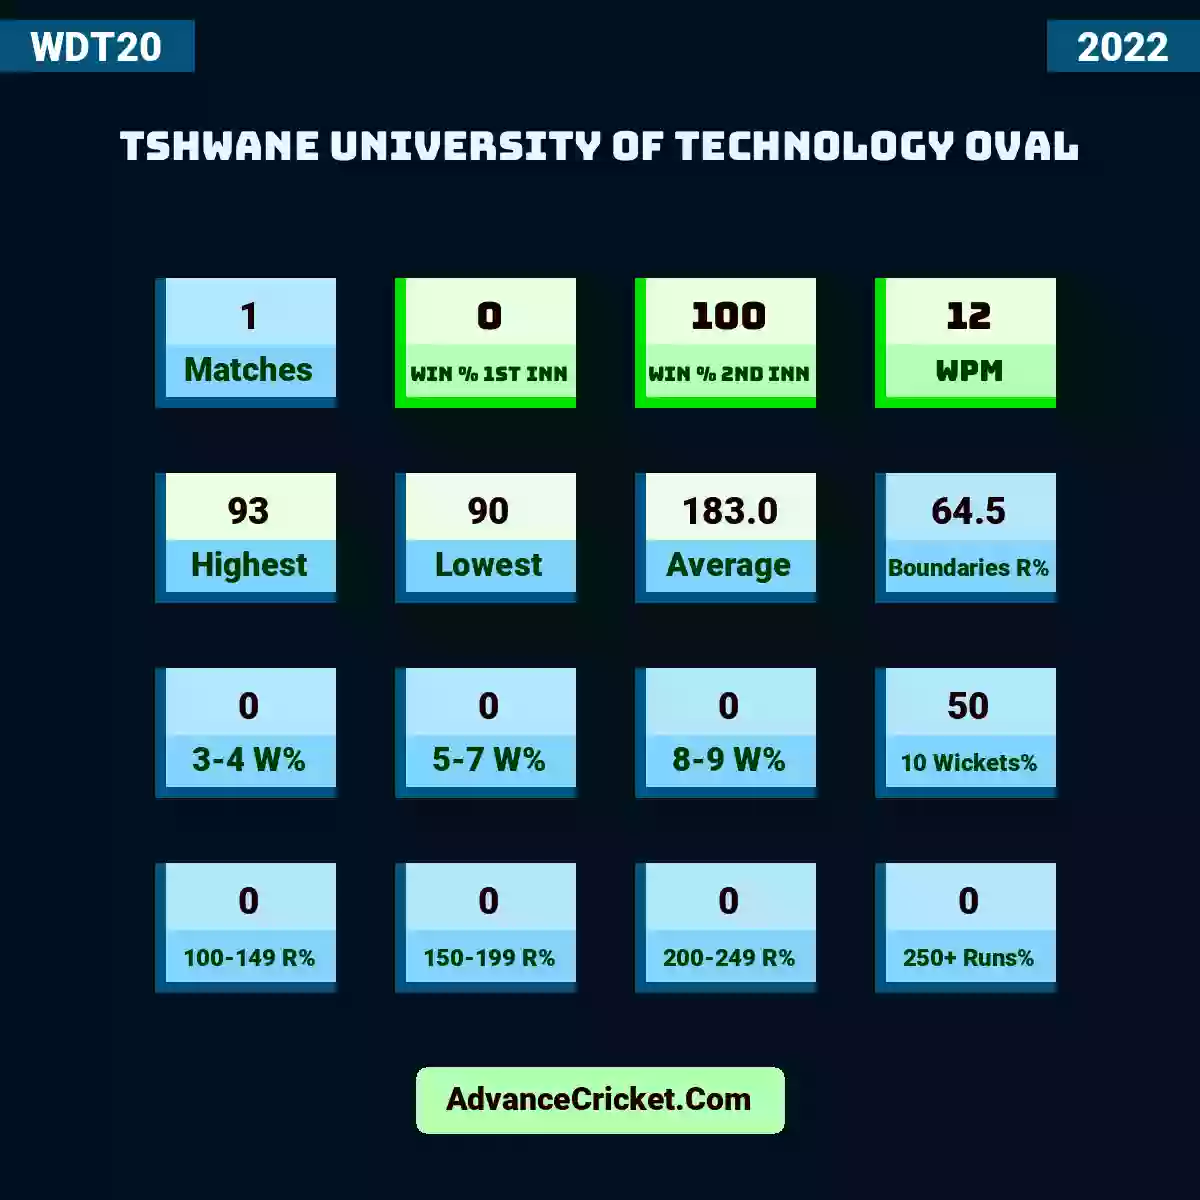 Image showing Tshwane University Of Technology Oval with Matches: 1, Win % 1st Inn: 0, Win % 2nd Inn: 100, WPM: 12, Highest: 93, Lowest: 90, Average: 183.0, Boundaries R%: 64.5, 3-4 W%: 0, 5-7 W%: 0, 8-9 W%: 0, 10 Wickets%: 50, 100-149 R%: 0, 150-199 R%: 0, 200-249 R%: 0, 250+ Runs%: 0.